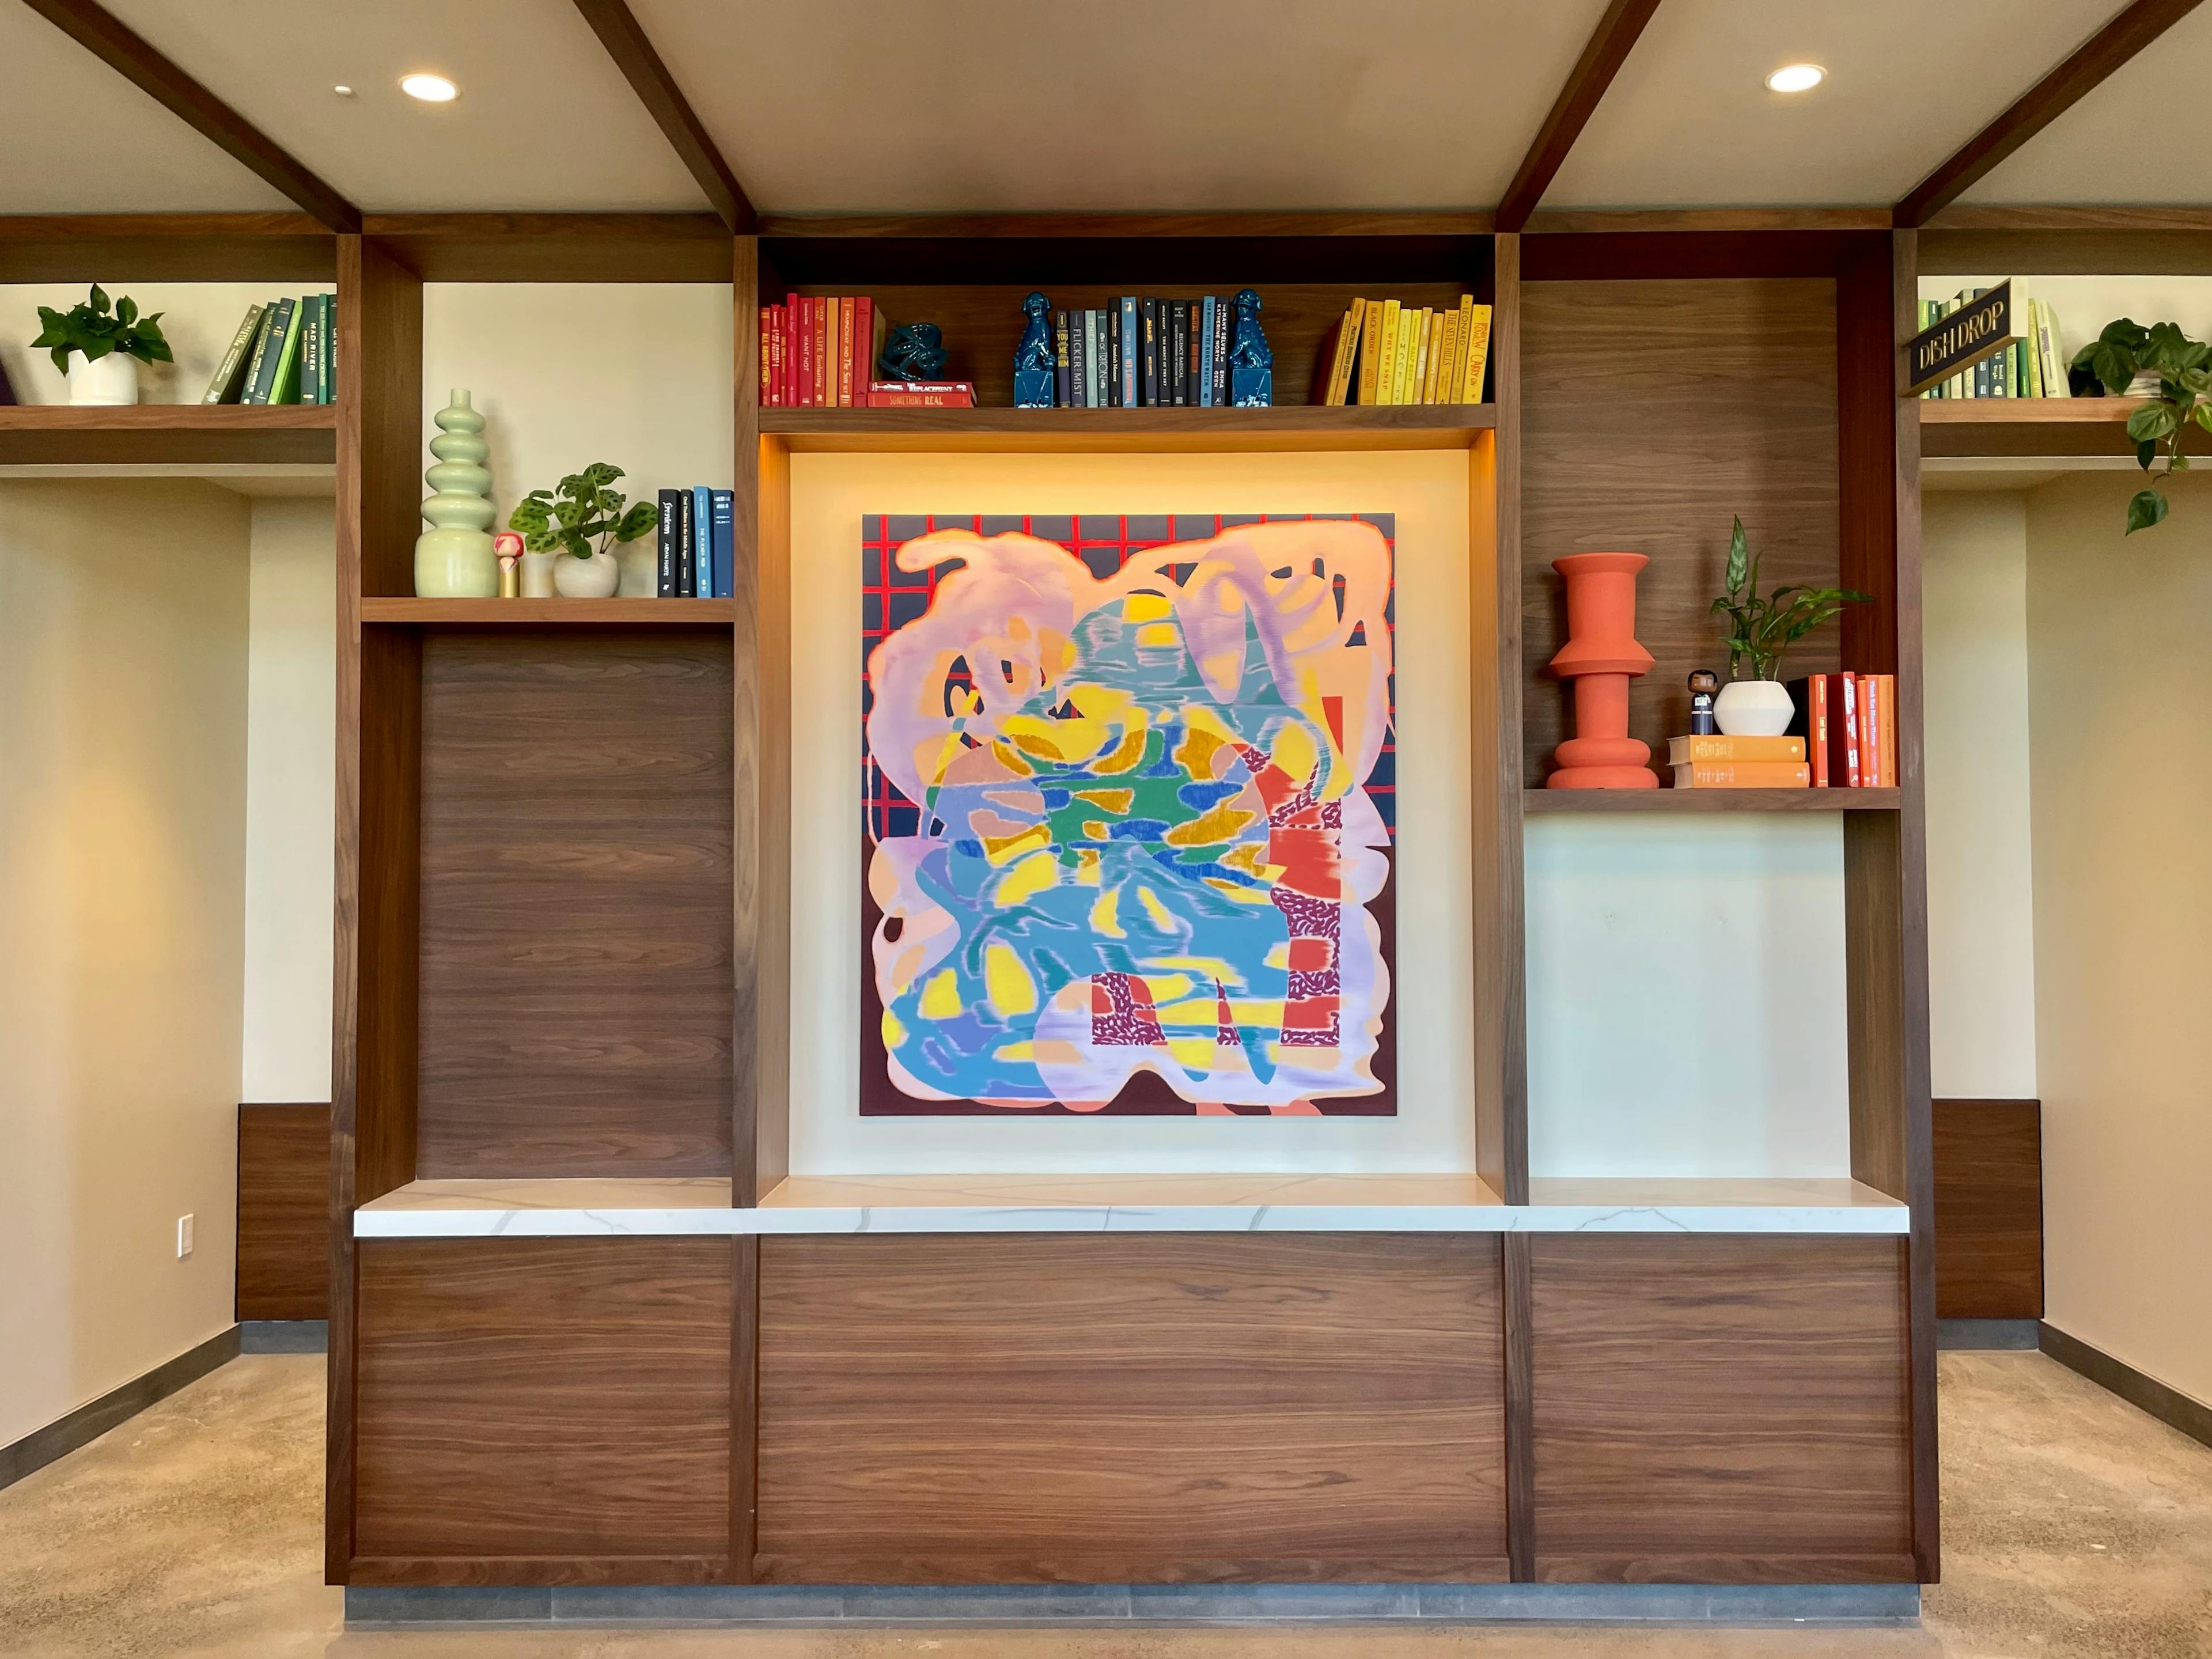 A large multicolored painting by artist Trina Turturici installed within wooden shelving next to books and sculptures.